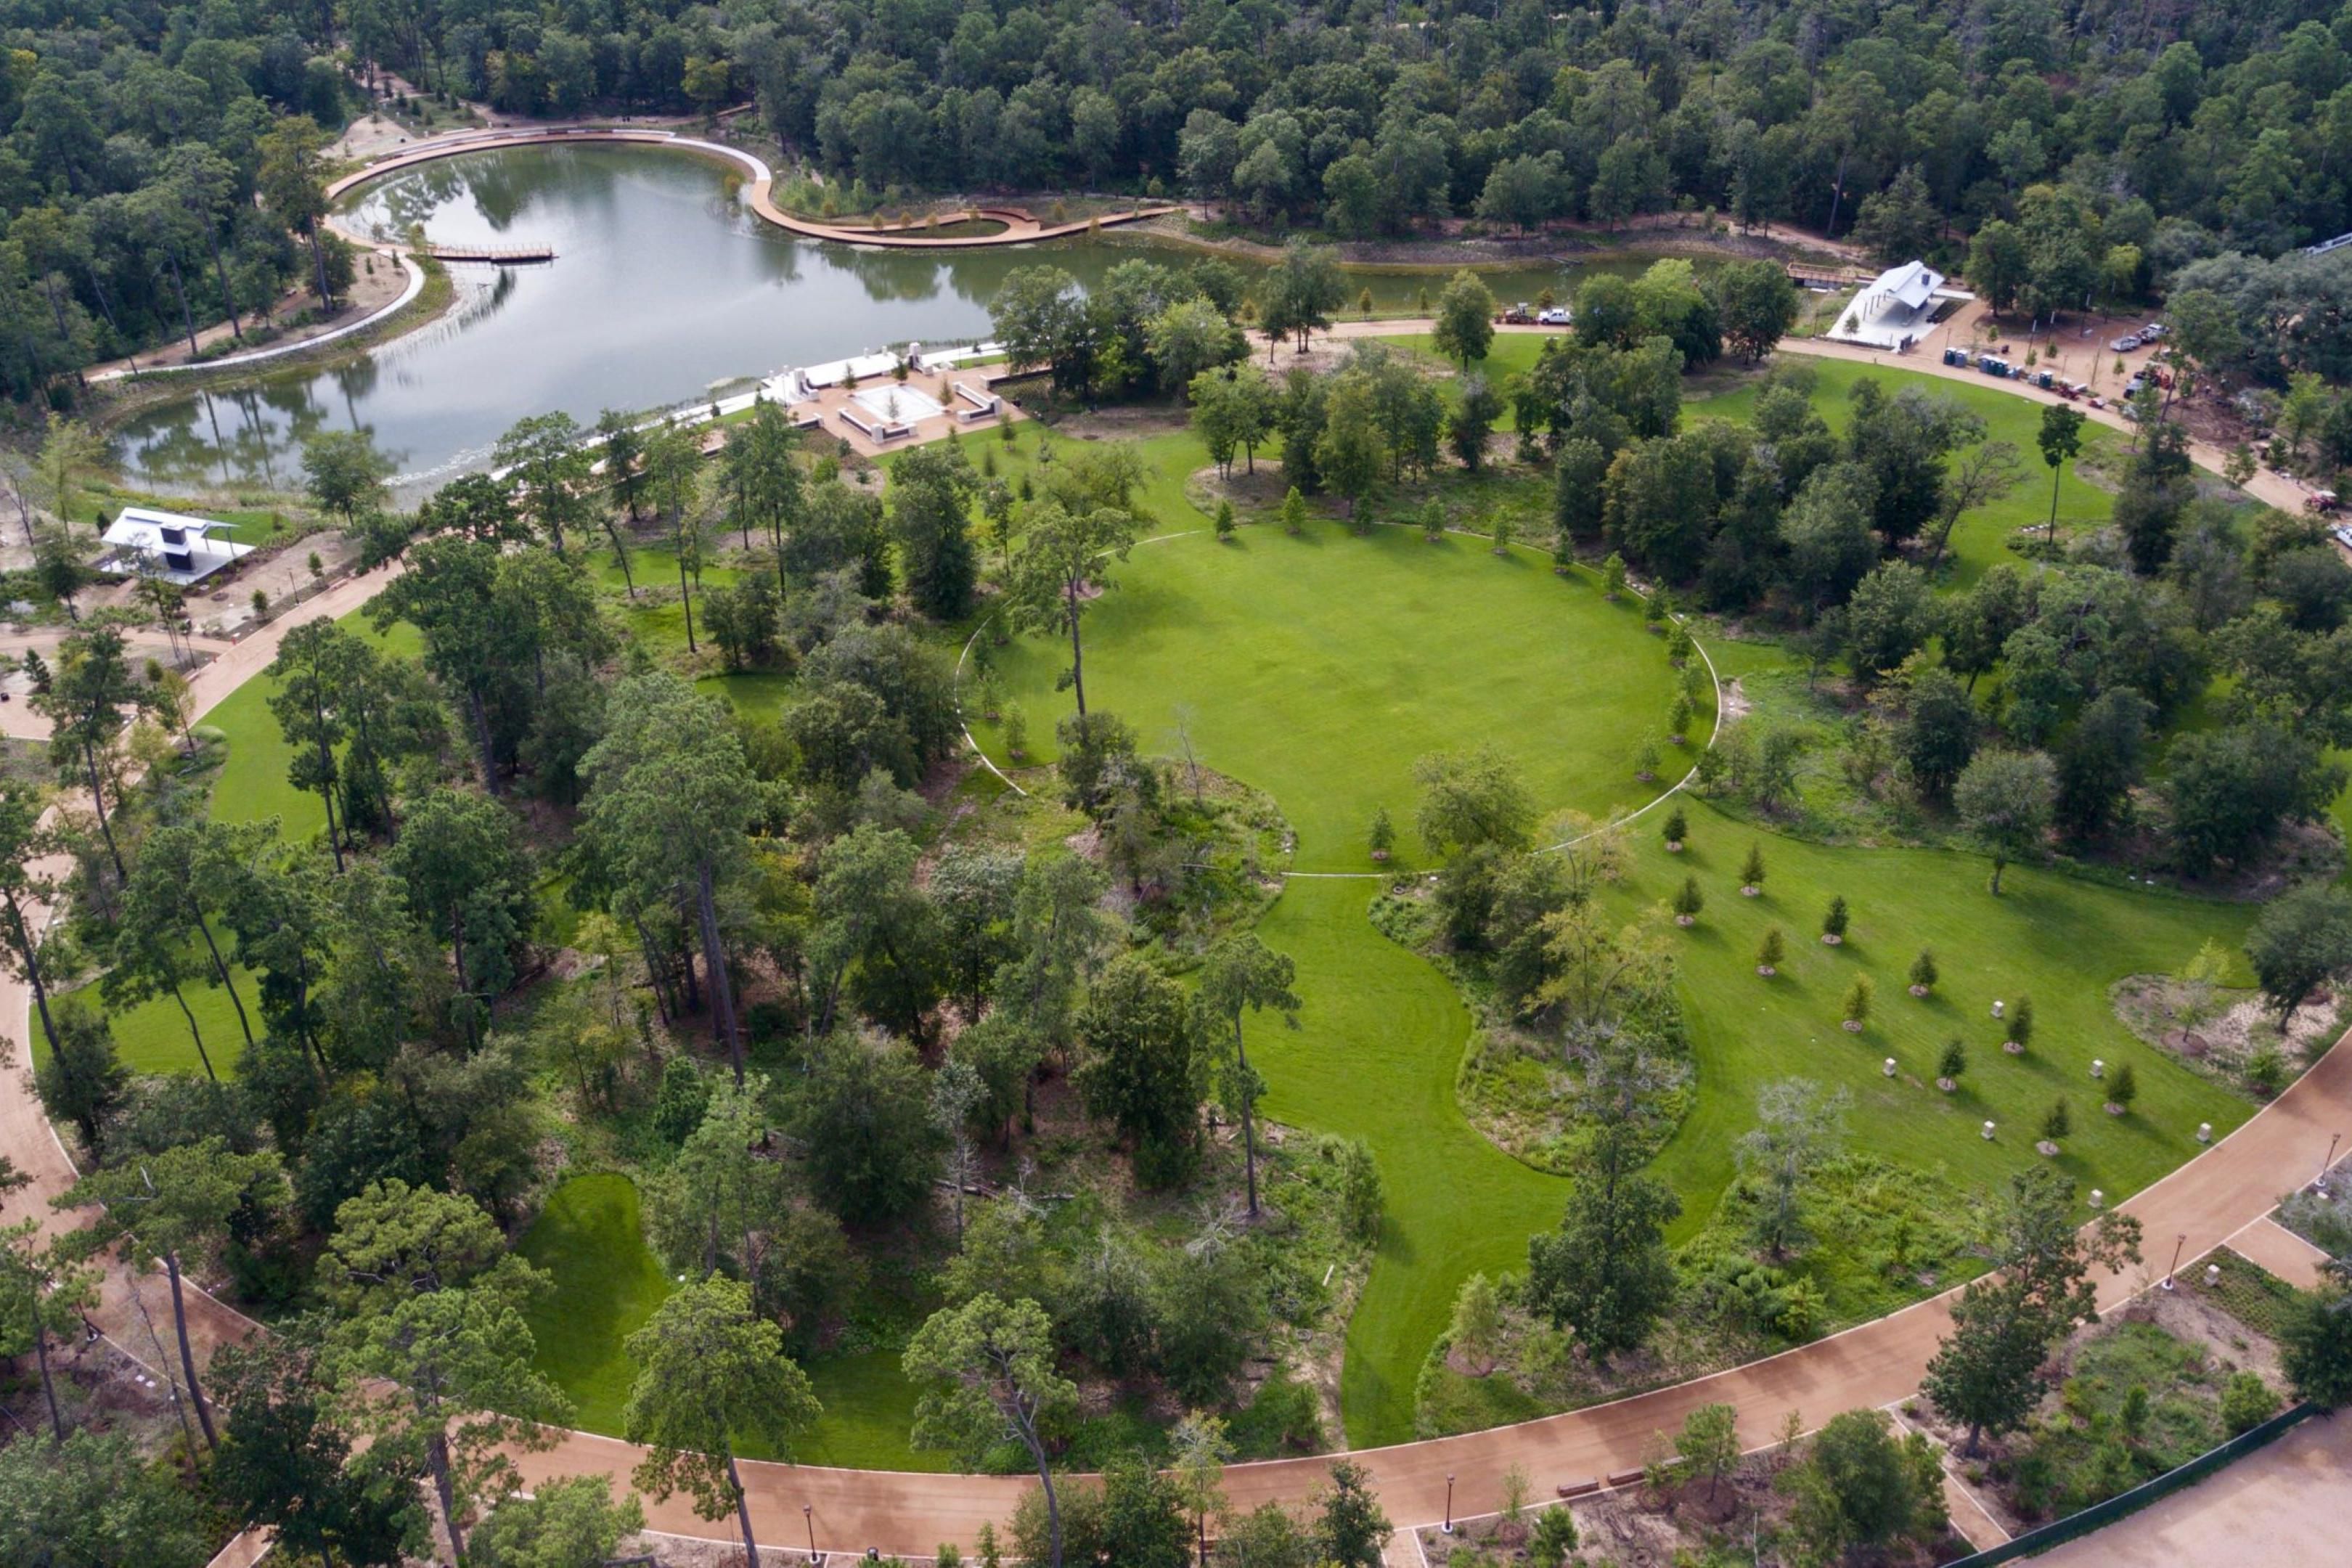 Get some fresh air in one of the largest urban parks in the United States. Over 1,400 acres of nature including running, riding, youth sports and the home of the Houston Open Golf Tournament annually.